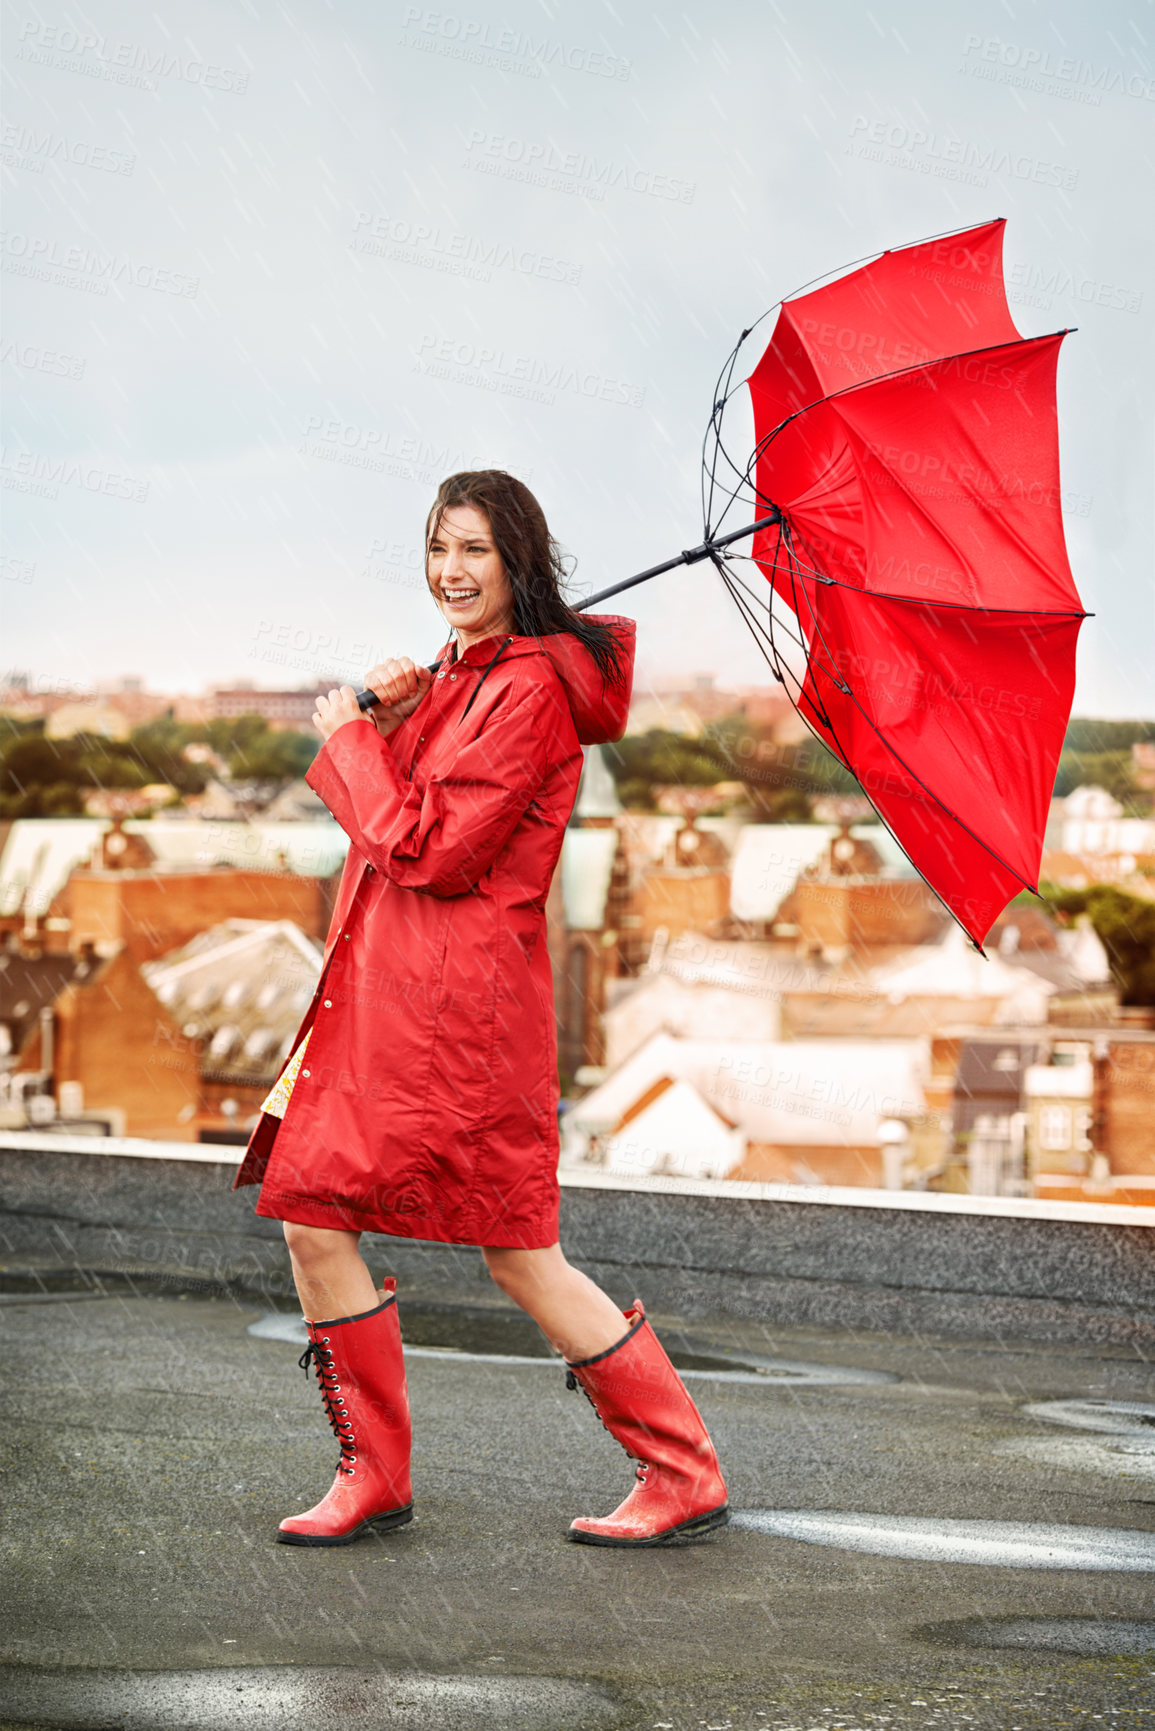 Buy stock photo Young woman laughing while being battered by rain and wind on a rooftop